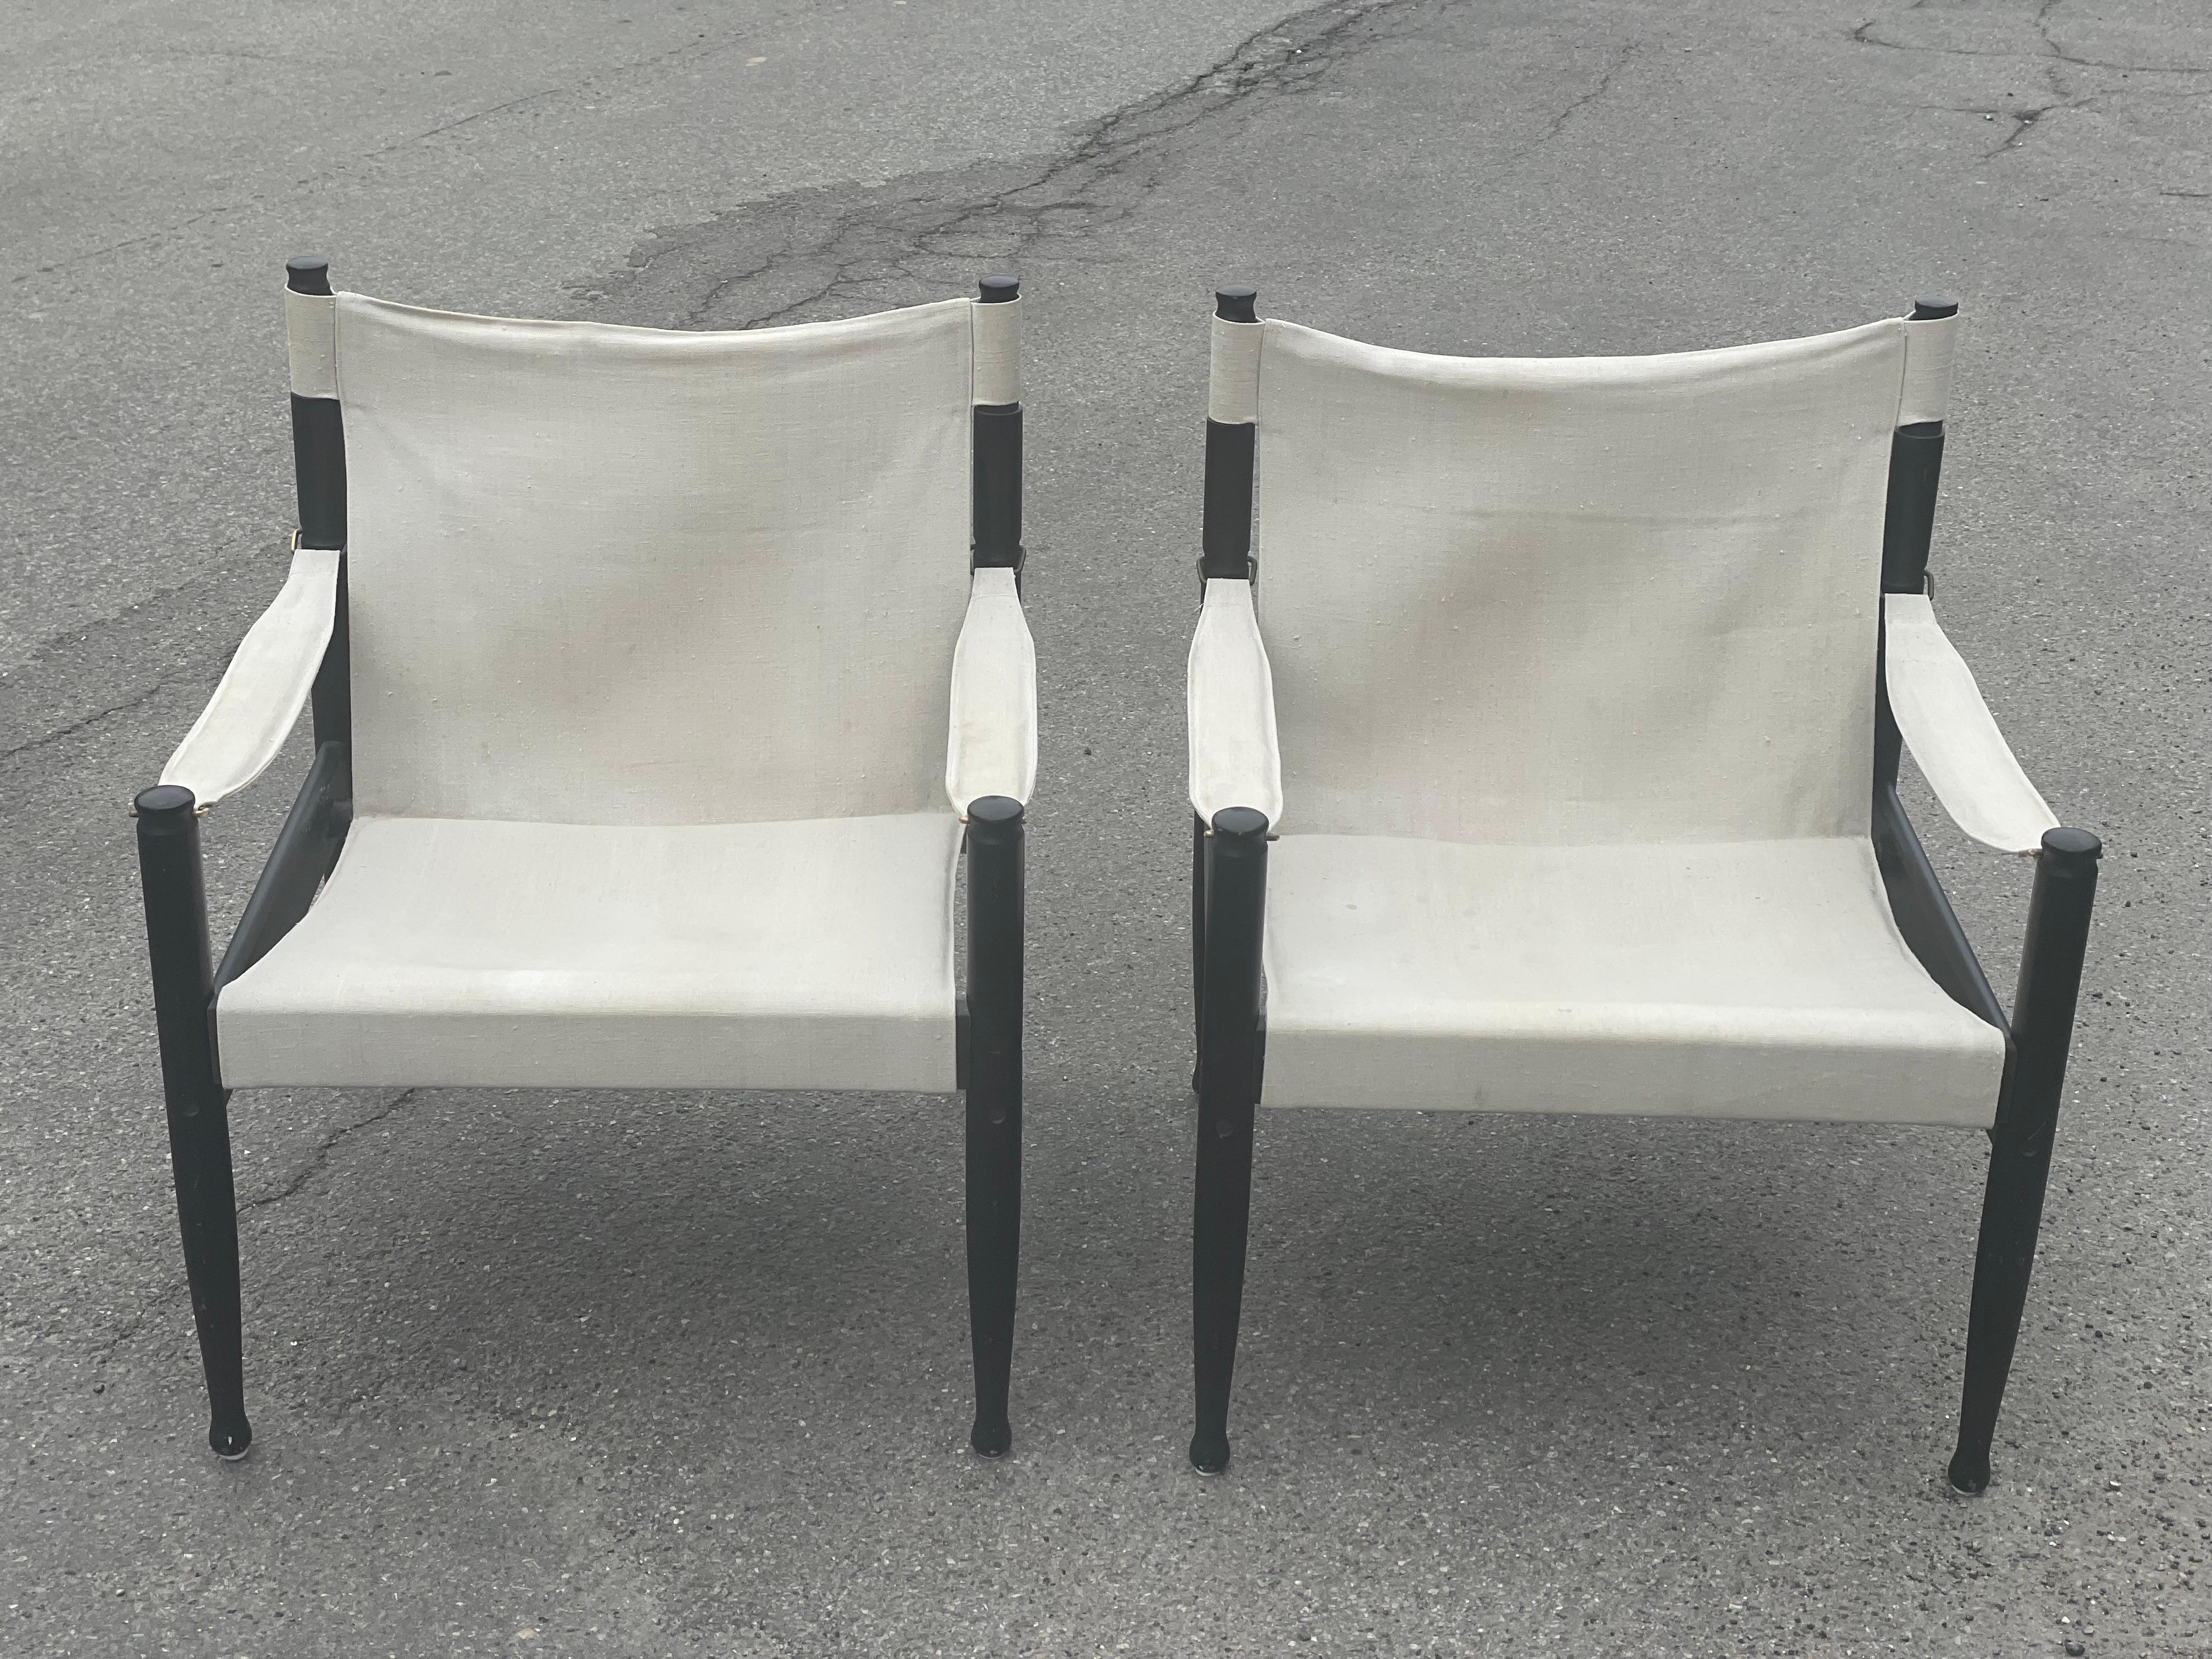 Looking for the perfect blend of comfort and style in your home decor Look no further than these exquisite safari lounge chairs by Erik Worts for Niels Eilersen. With their sleek black enamelled frames and durable canvas upholstery, these chairs